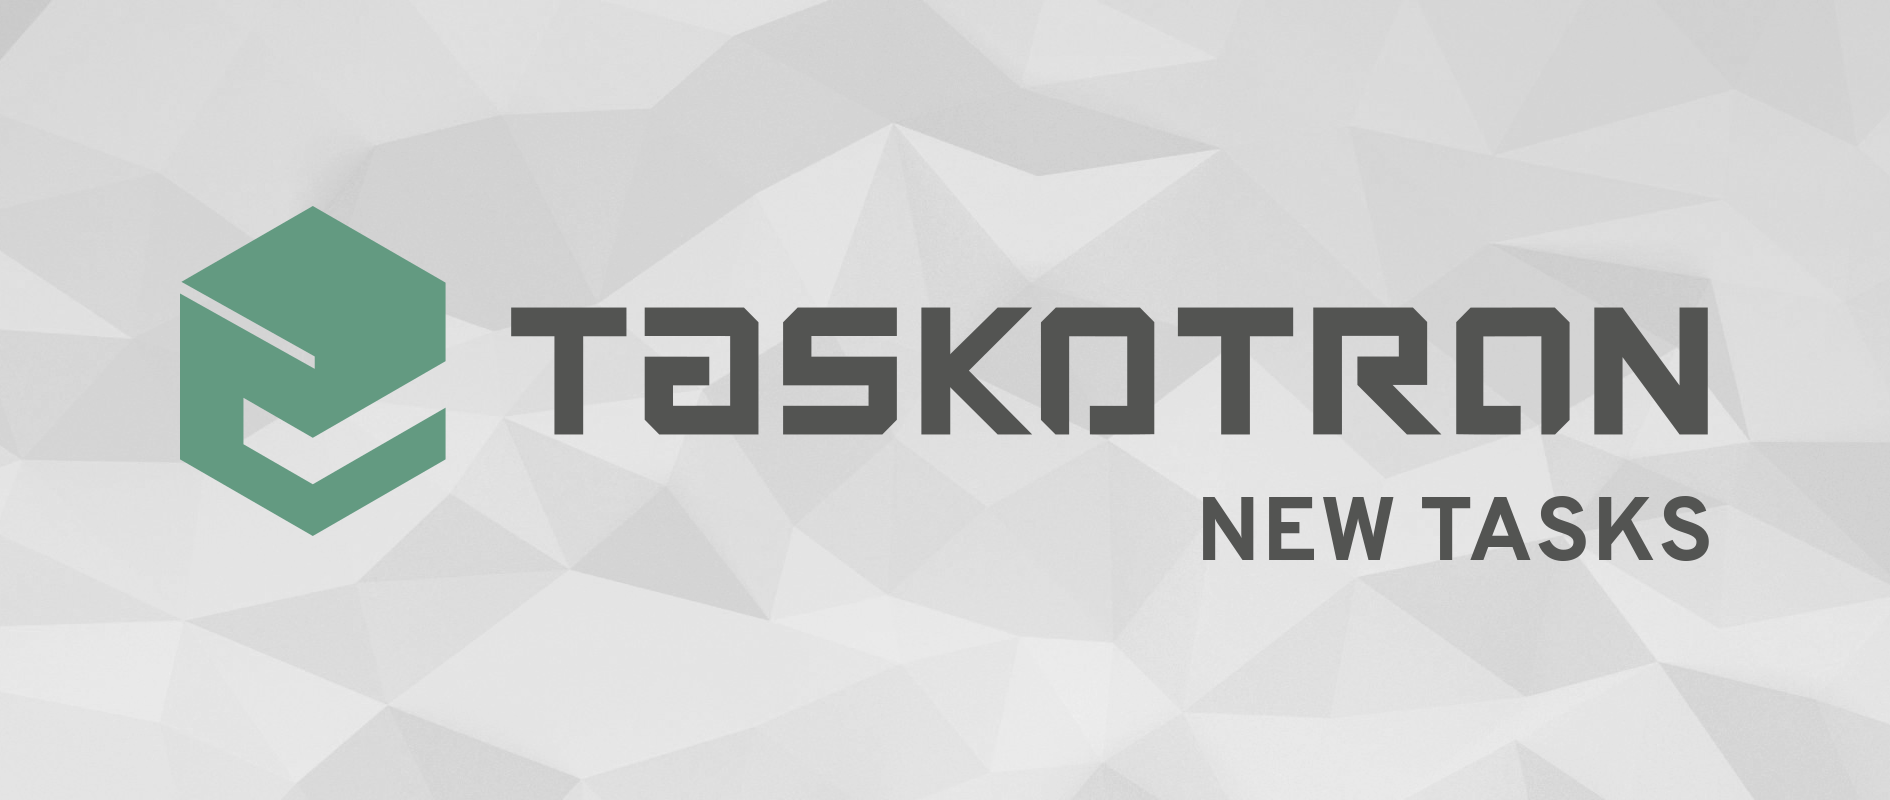 New tasks now available in Taskotron